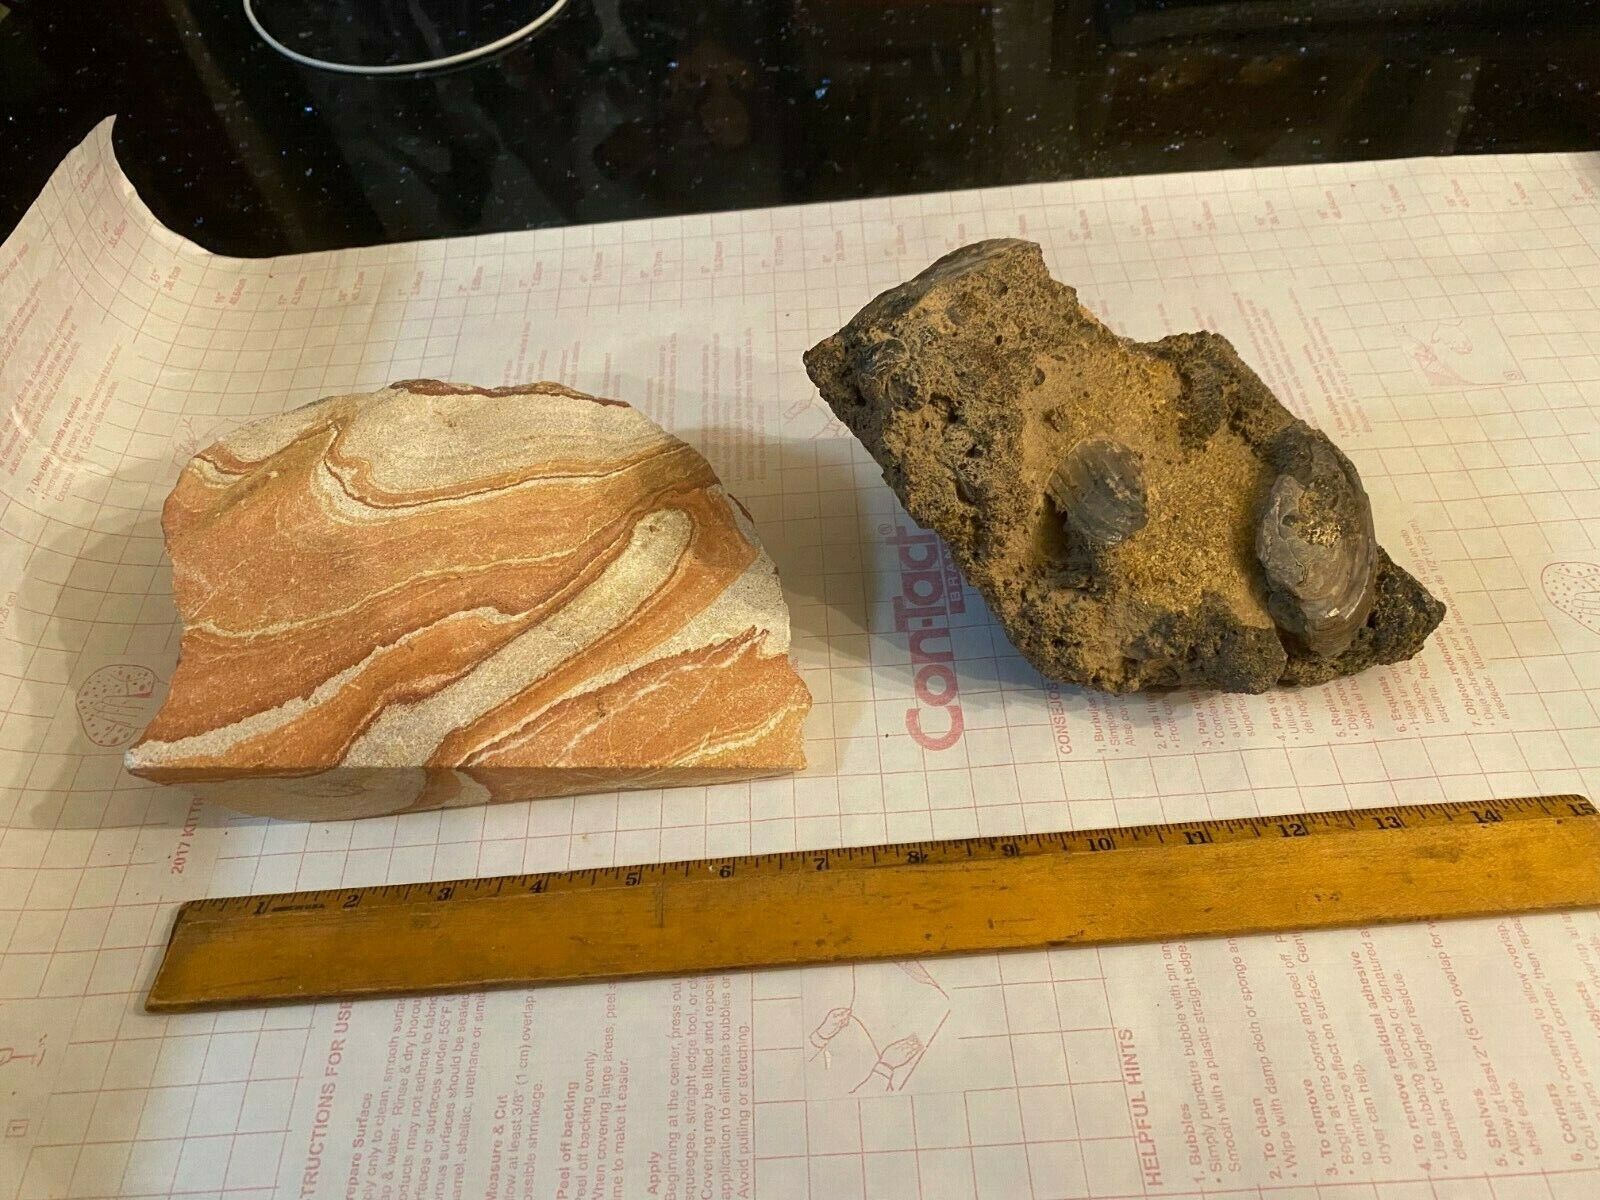 lot of 2 huge sandstone and fossilized clams, 7" and 8" long Без бренда